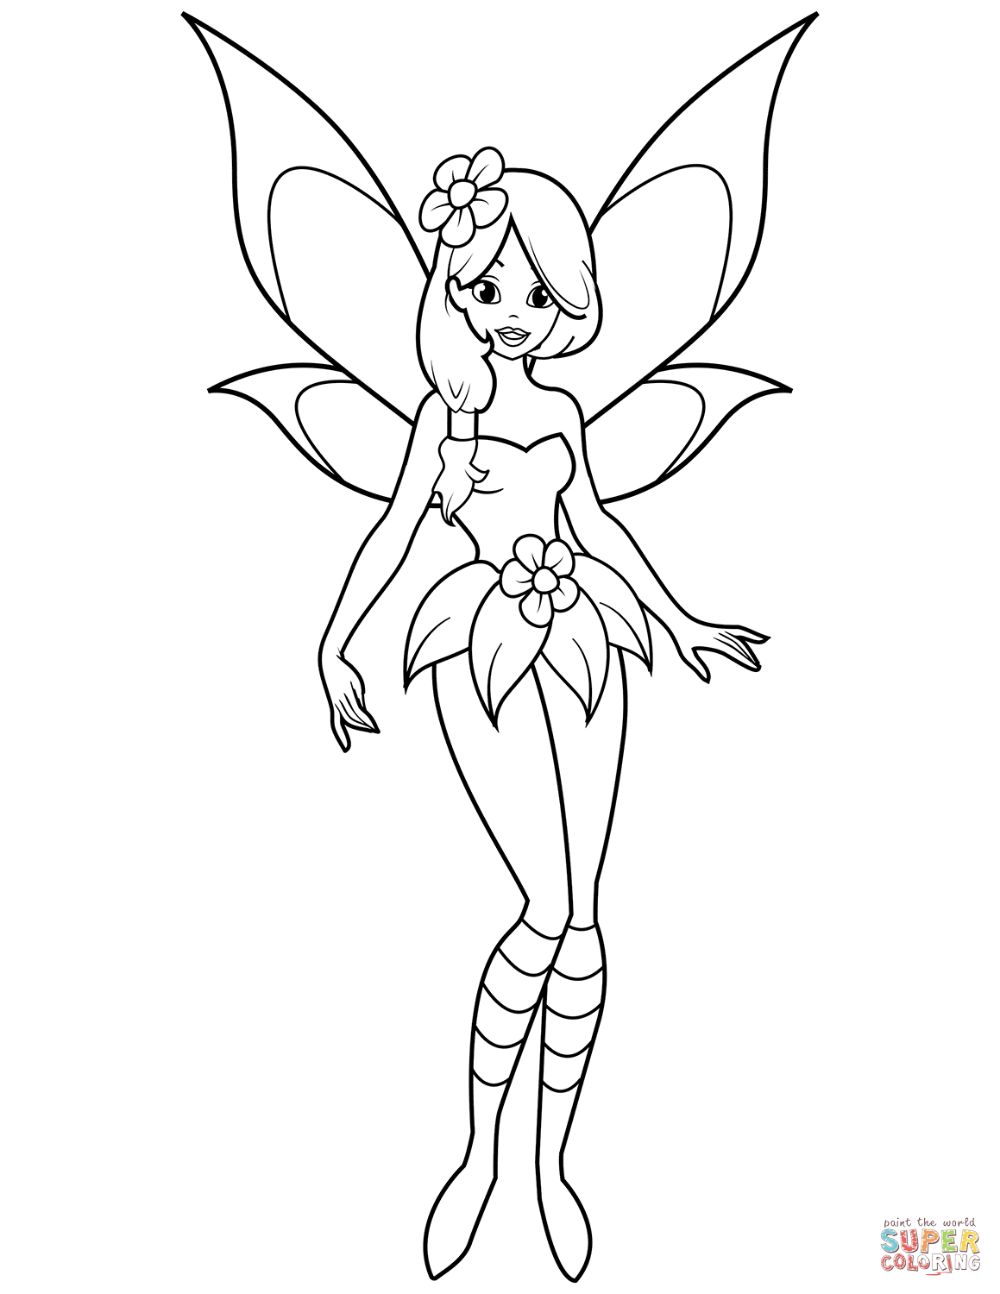 Fairy coloring page free printable coloring pages fairy coloring fairy coloring pages fairy coloring book